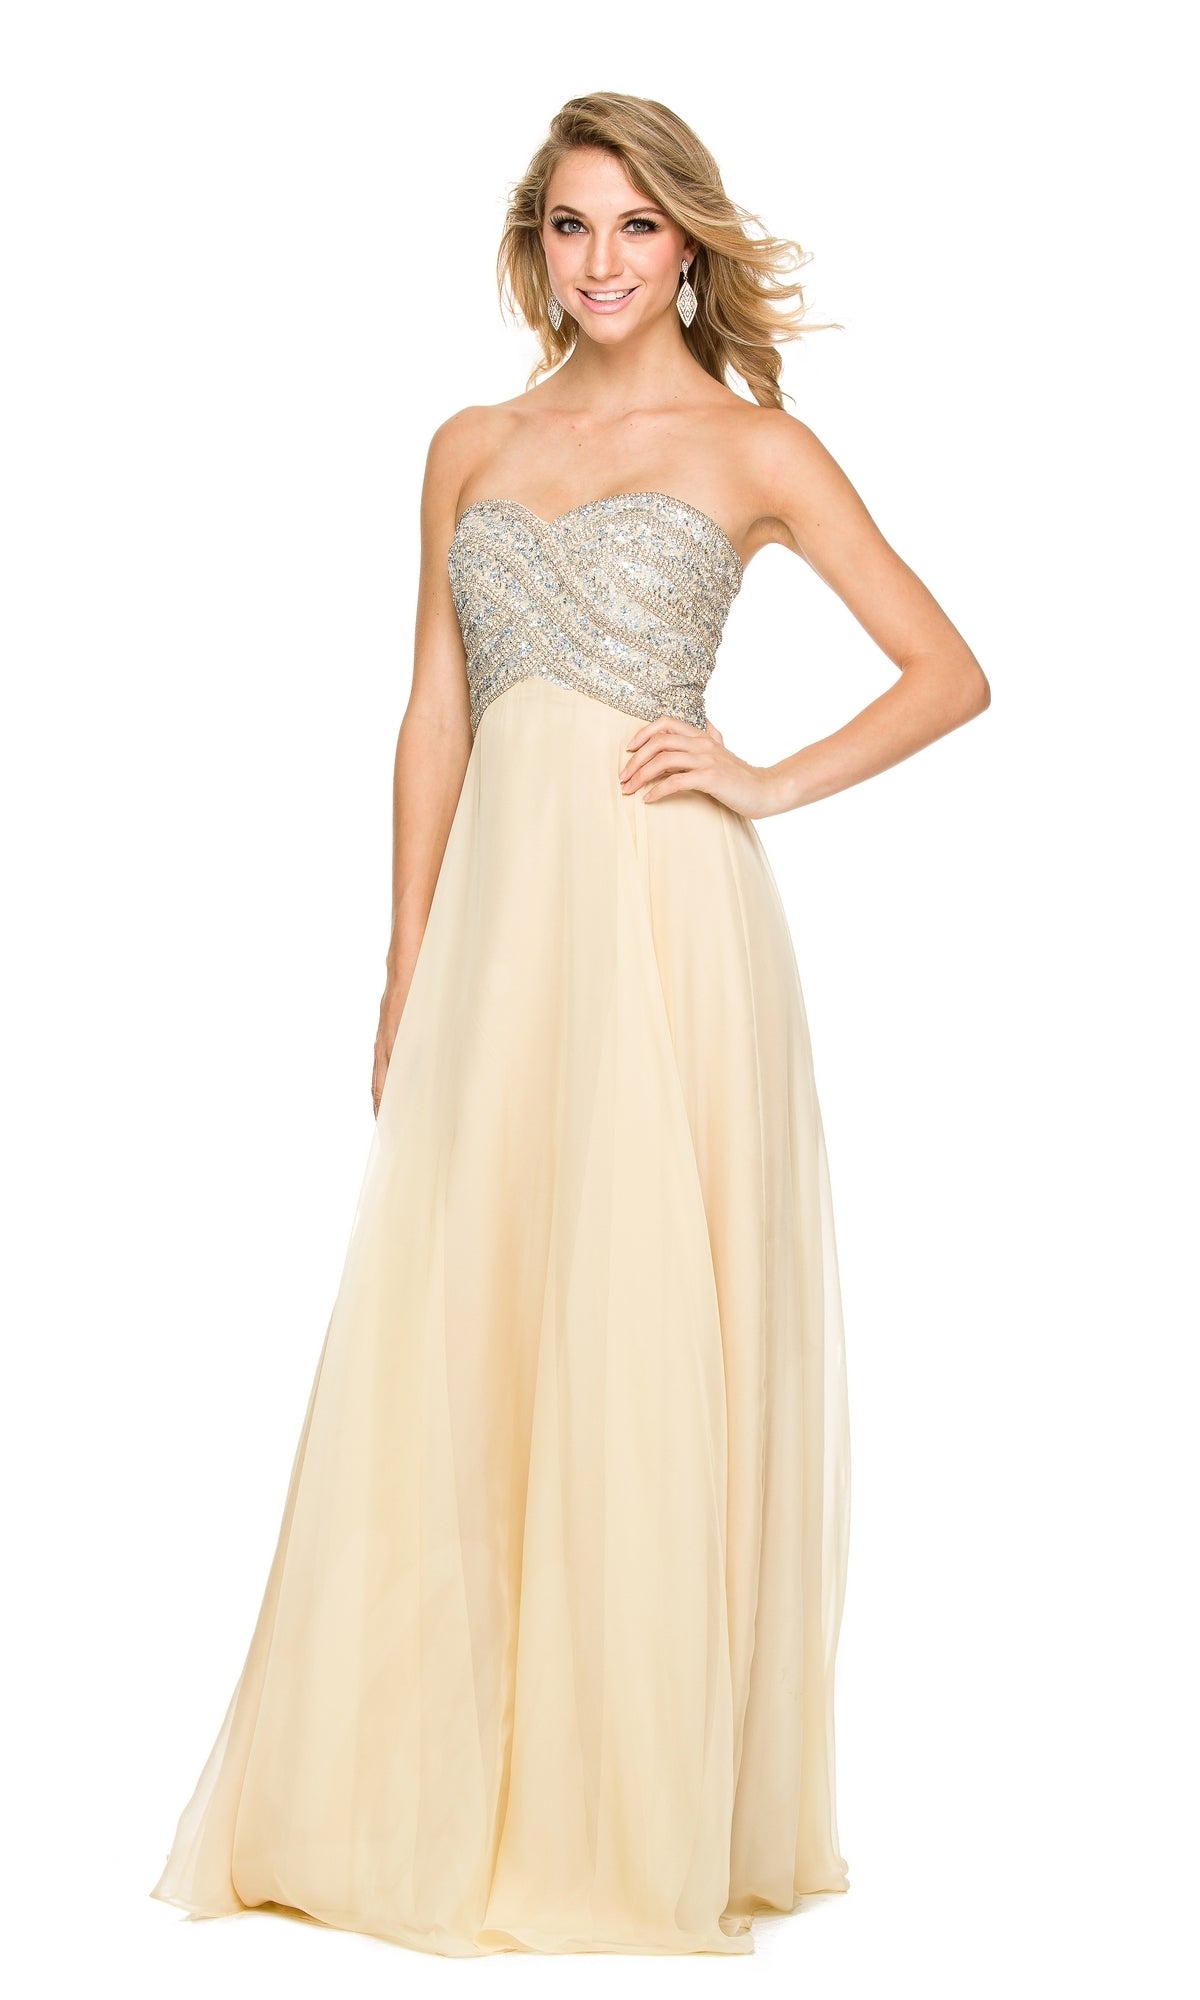 Gold Long Flowing Sweetheart Strapless Prom Dress